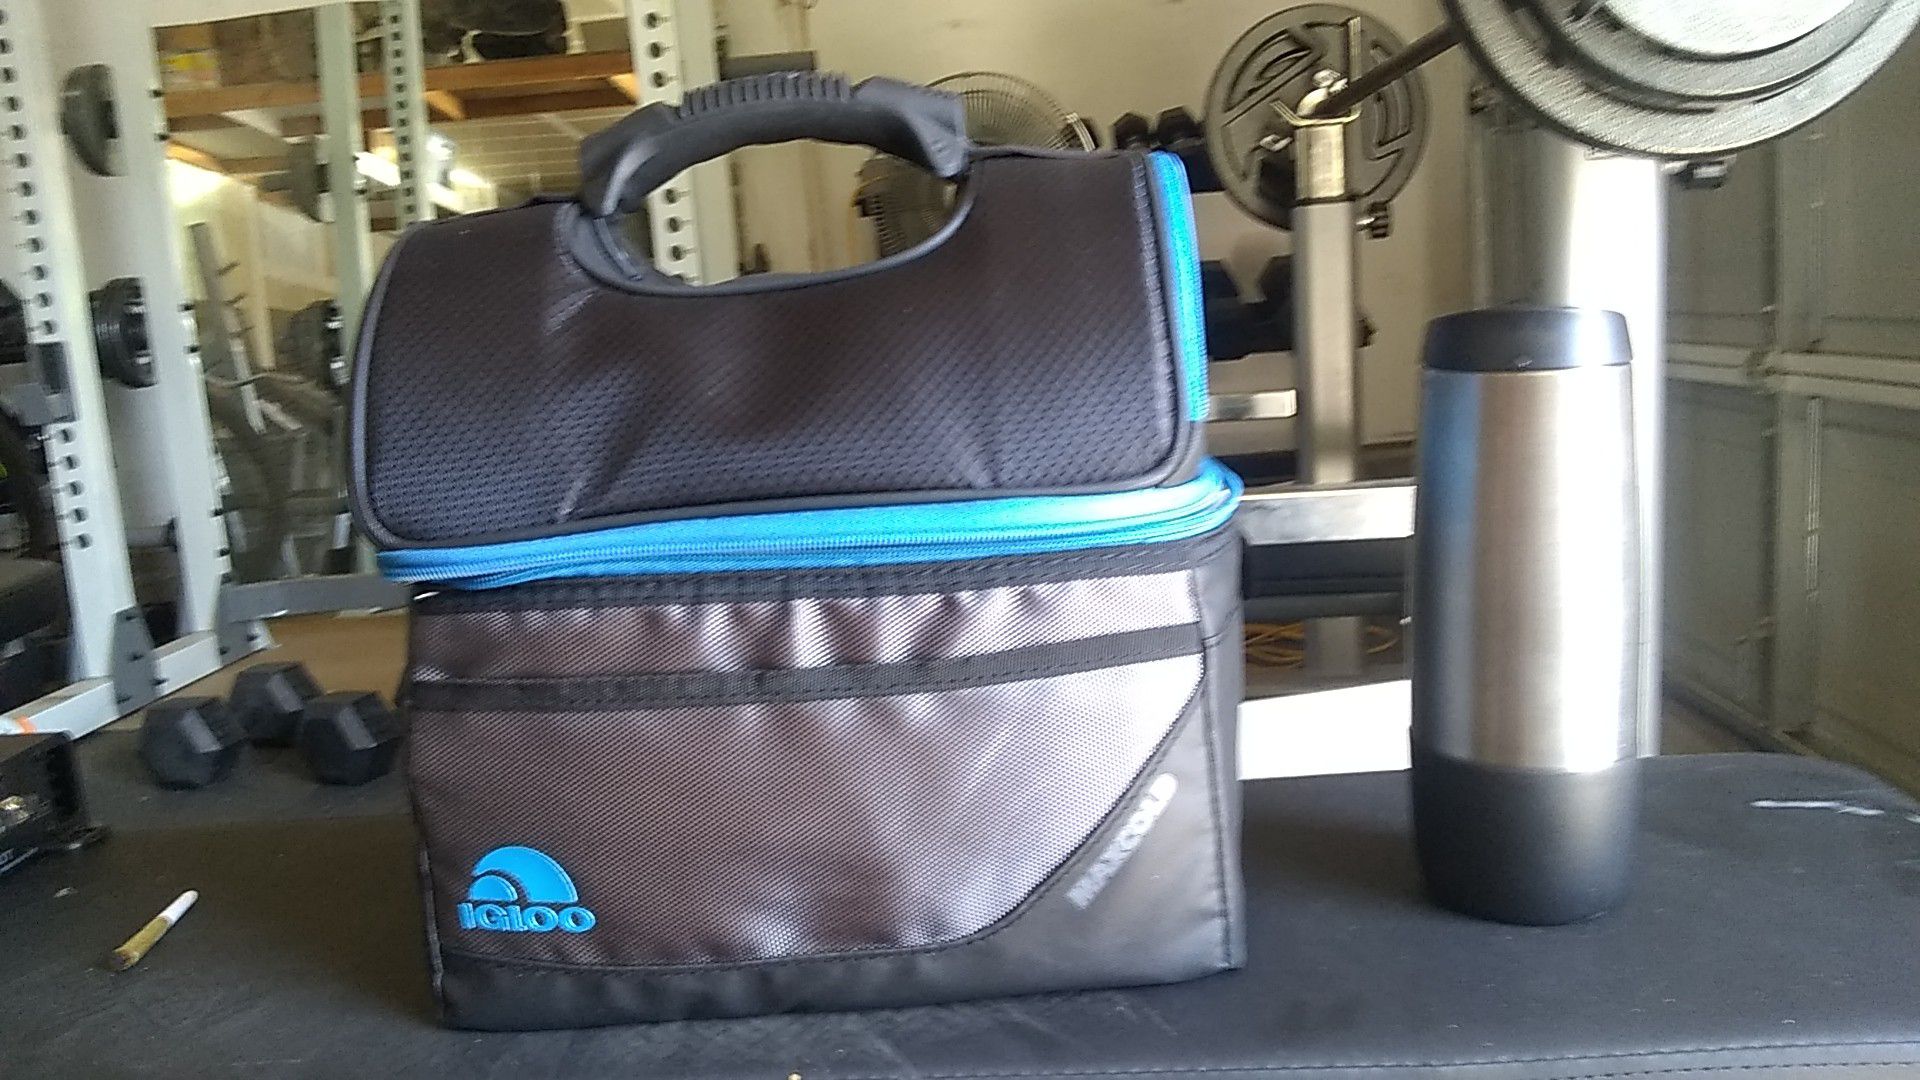 Igloo cooler lunch box and water bottle. used a couple times washed regularly